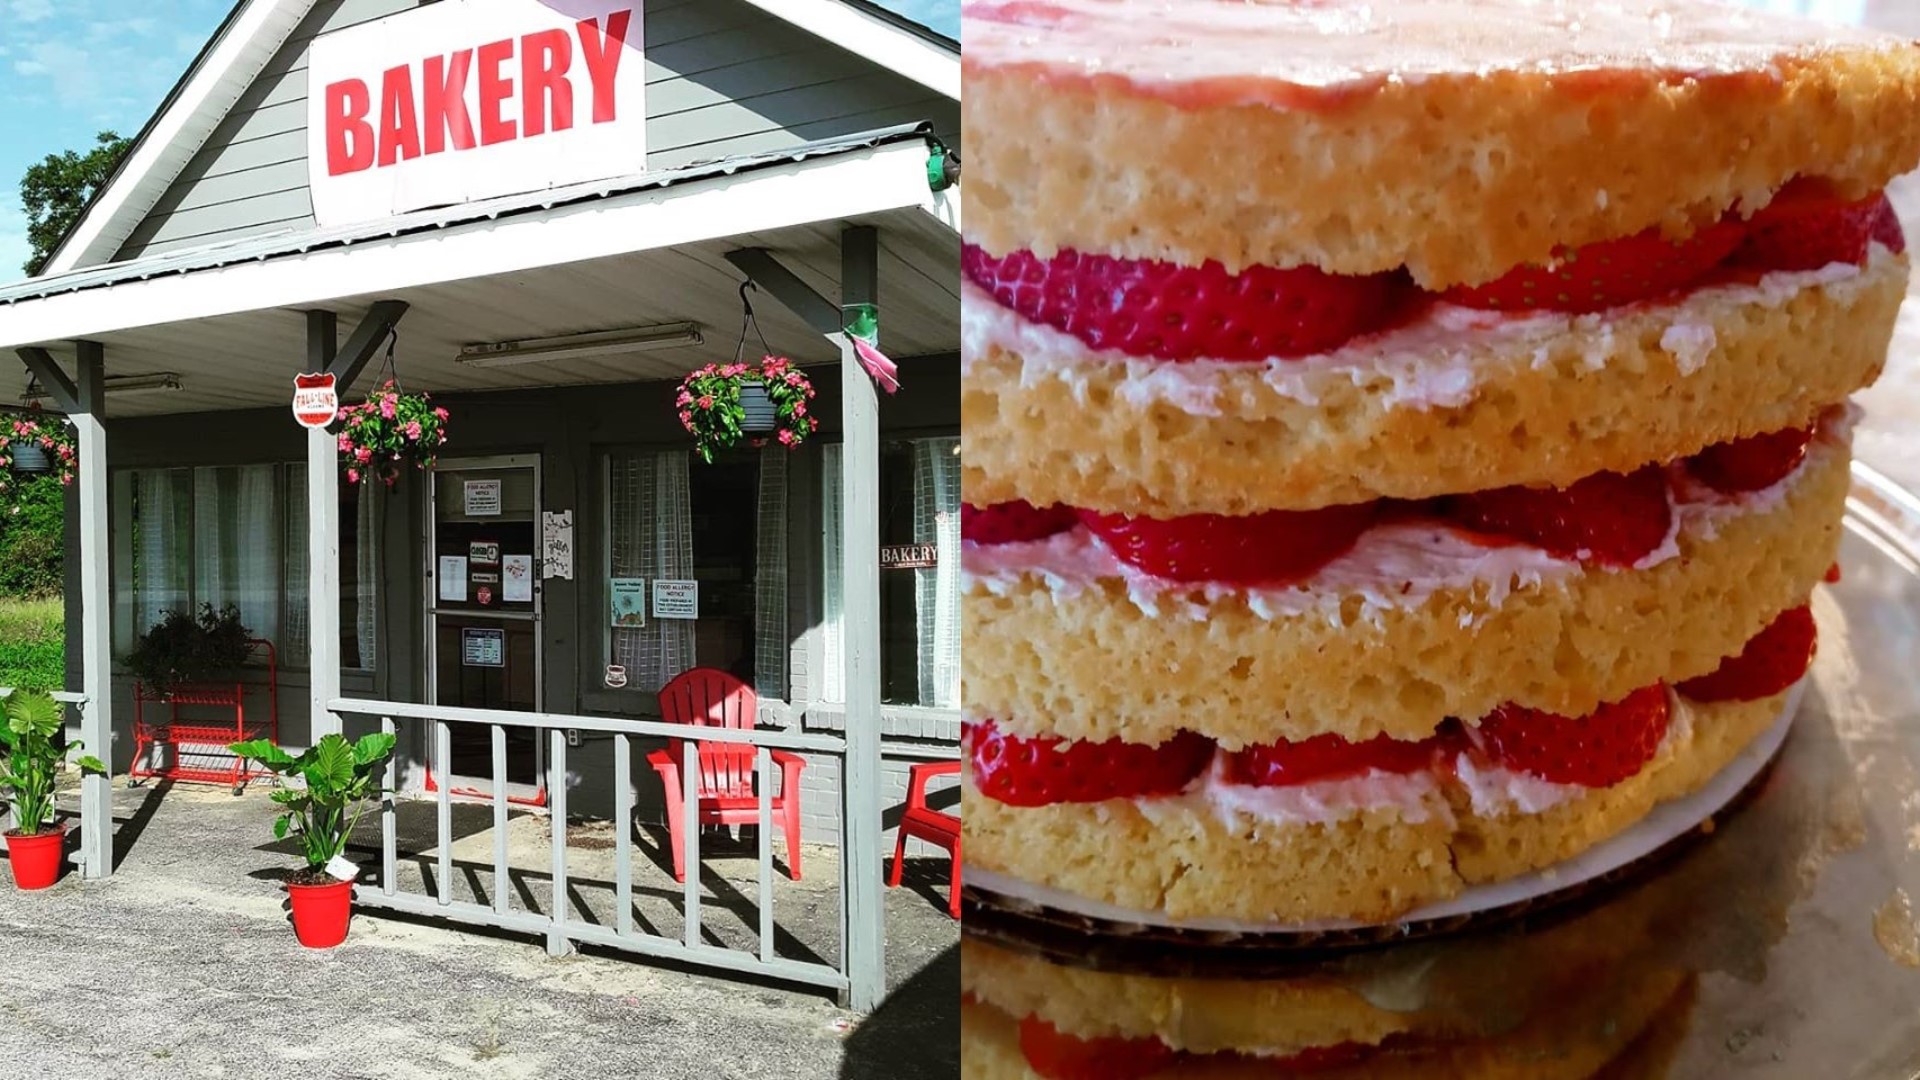 All of the sweet treats at Sweet Valley Bakery and Farmstead are sugar free, and they also sell gluten-free and Keto options.